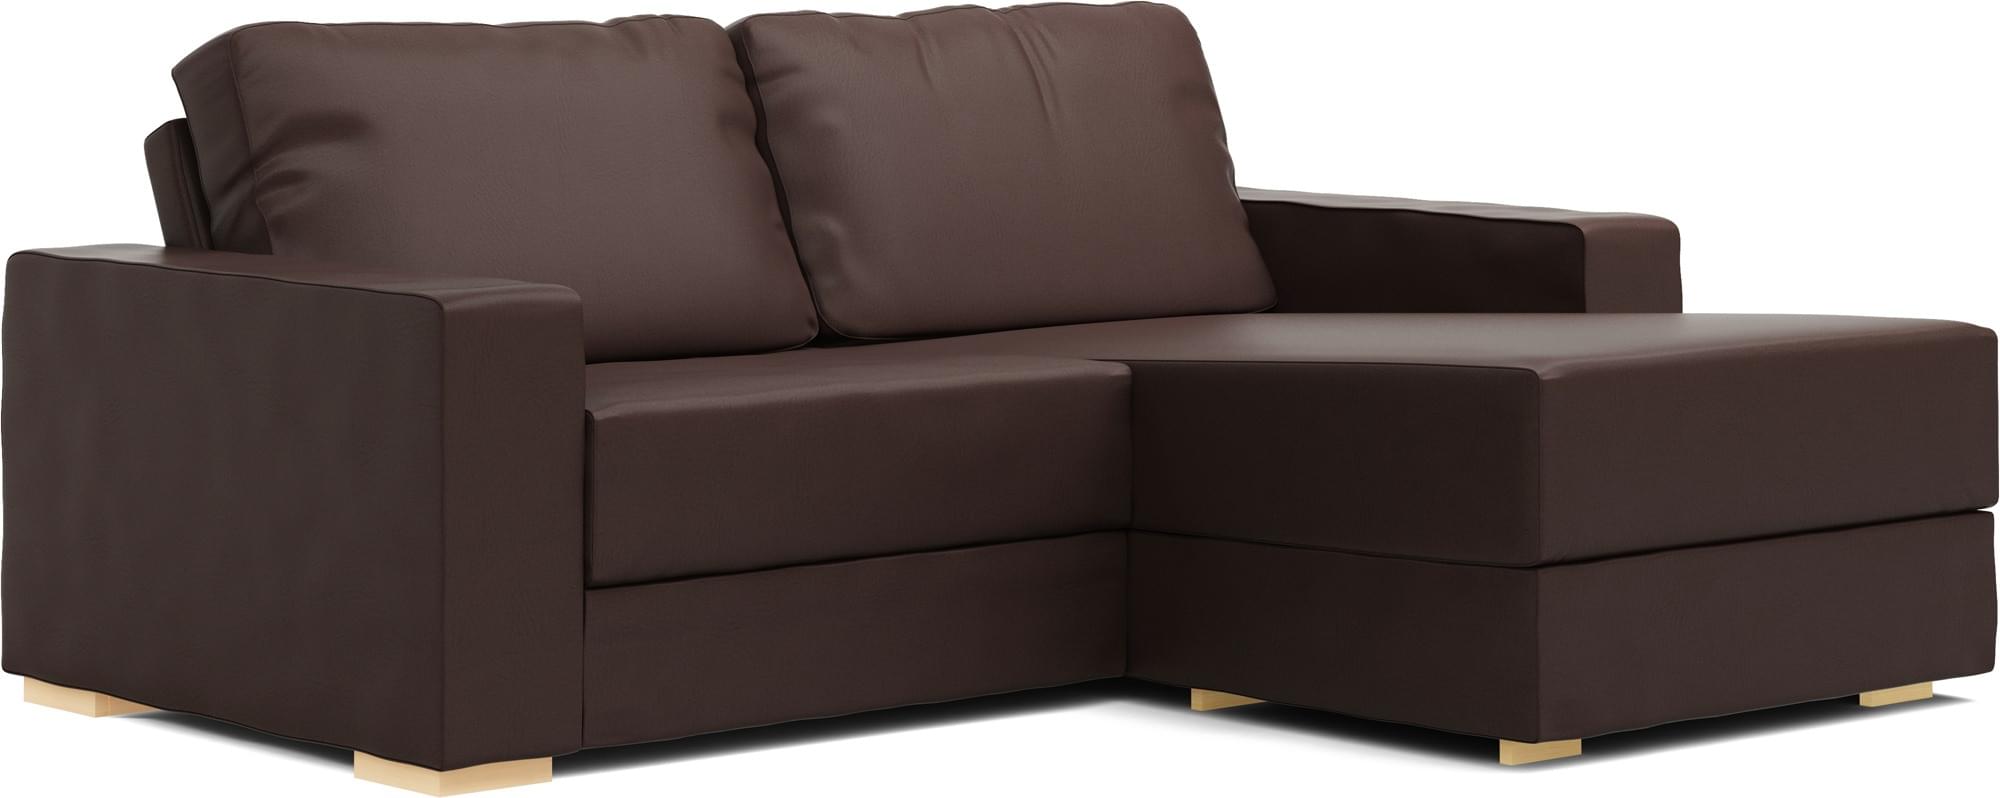 Sui 2 Seat Chaise Double Sofa Bed